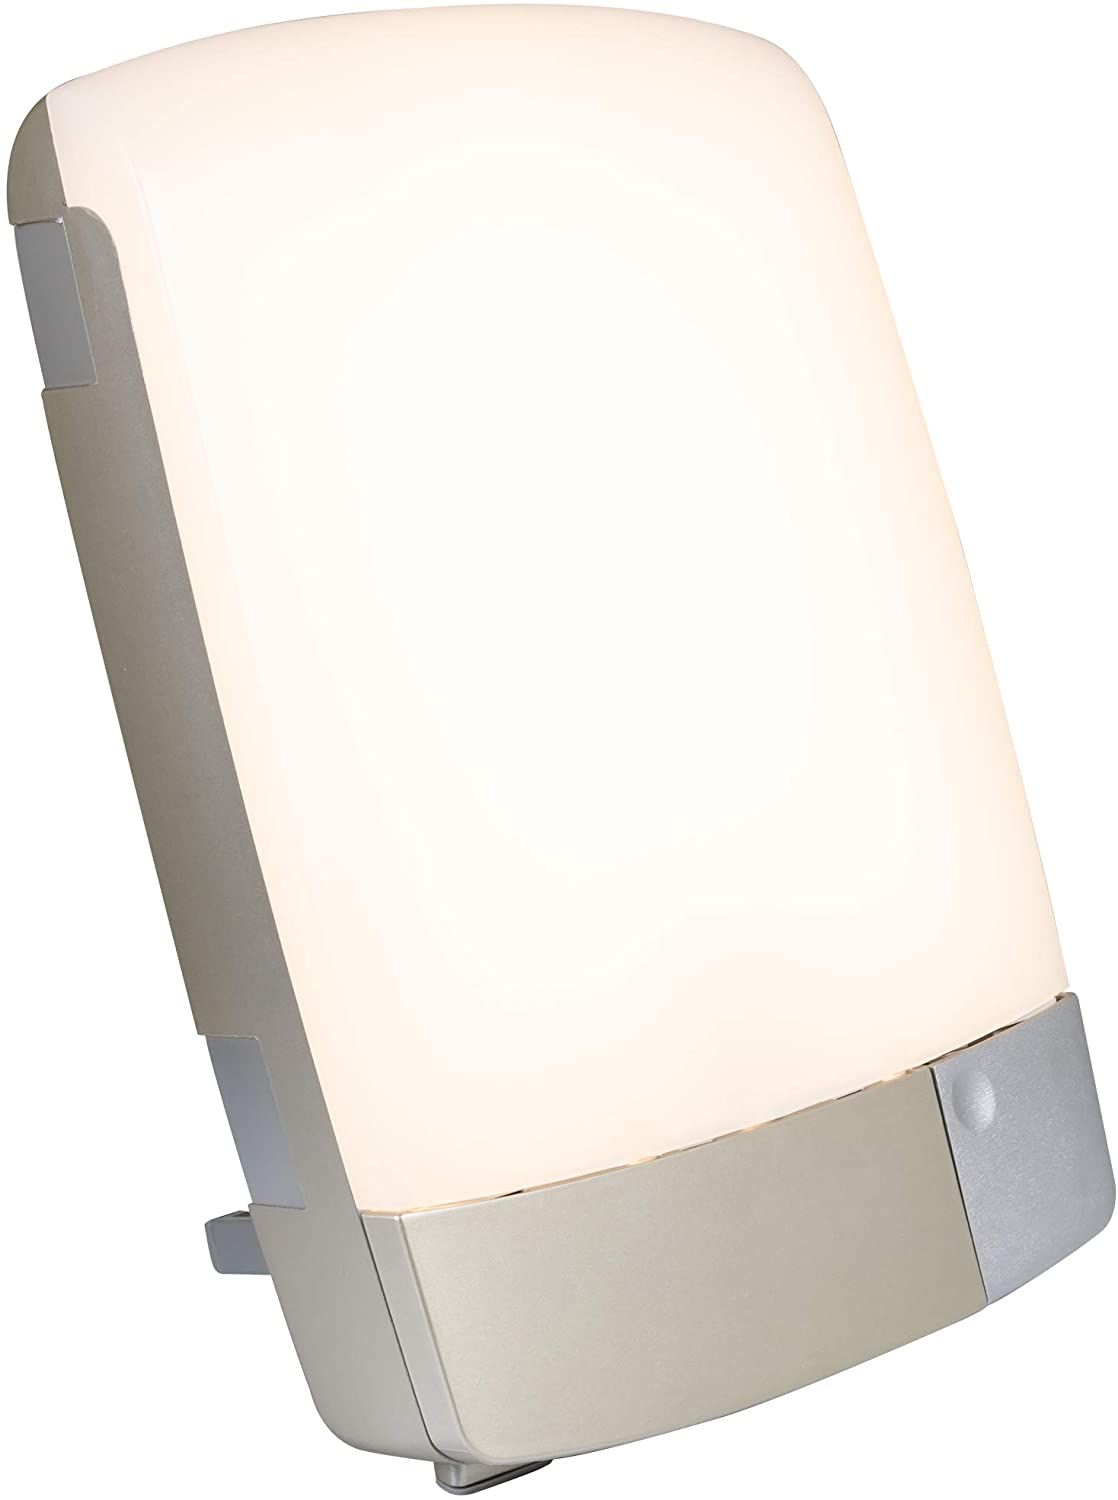 Carex Sunlite Light Therapy Lamp